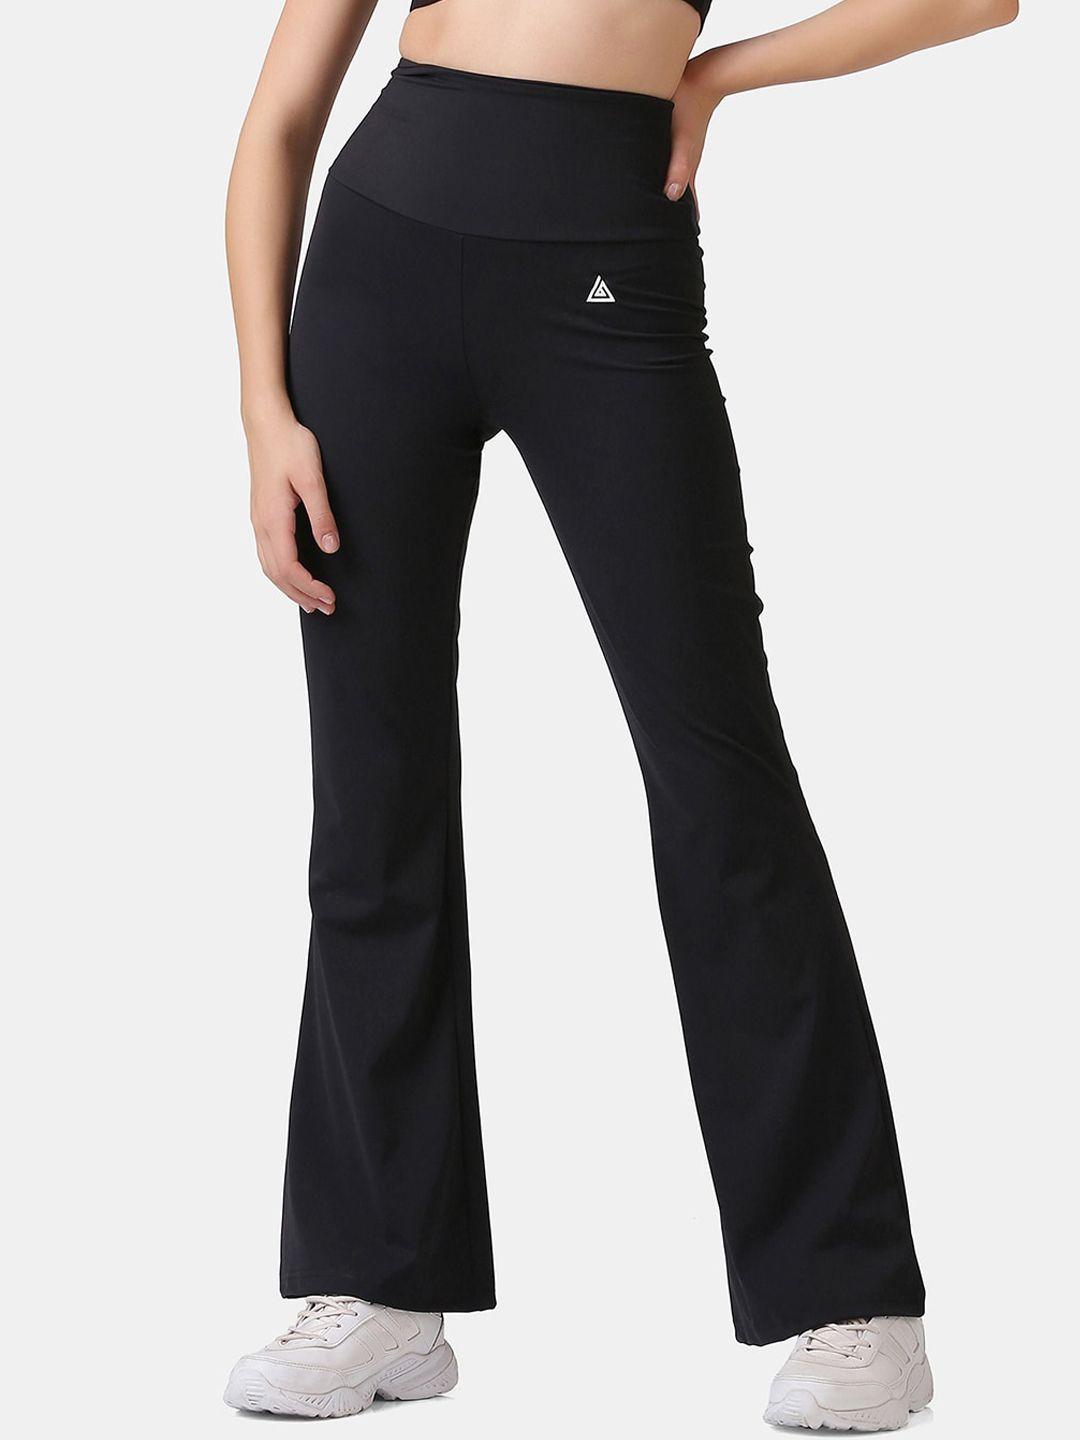 aesthetic bodies women black solid flared sports track pant